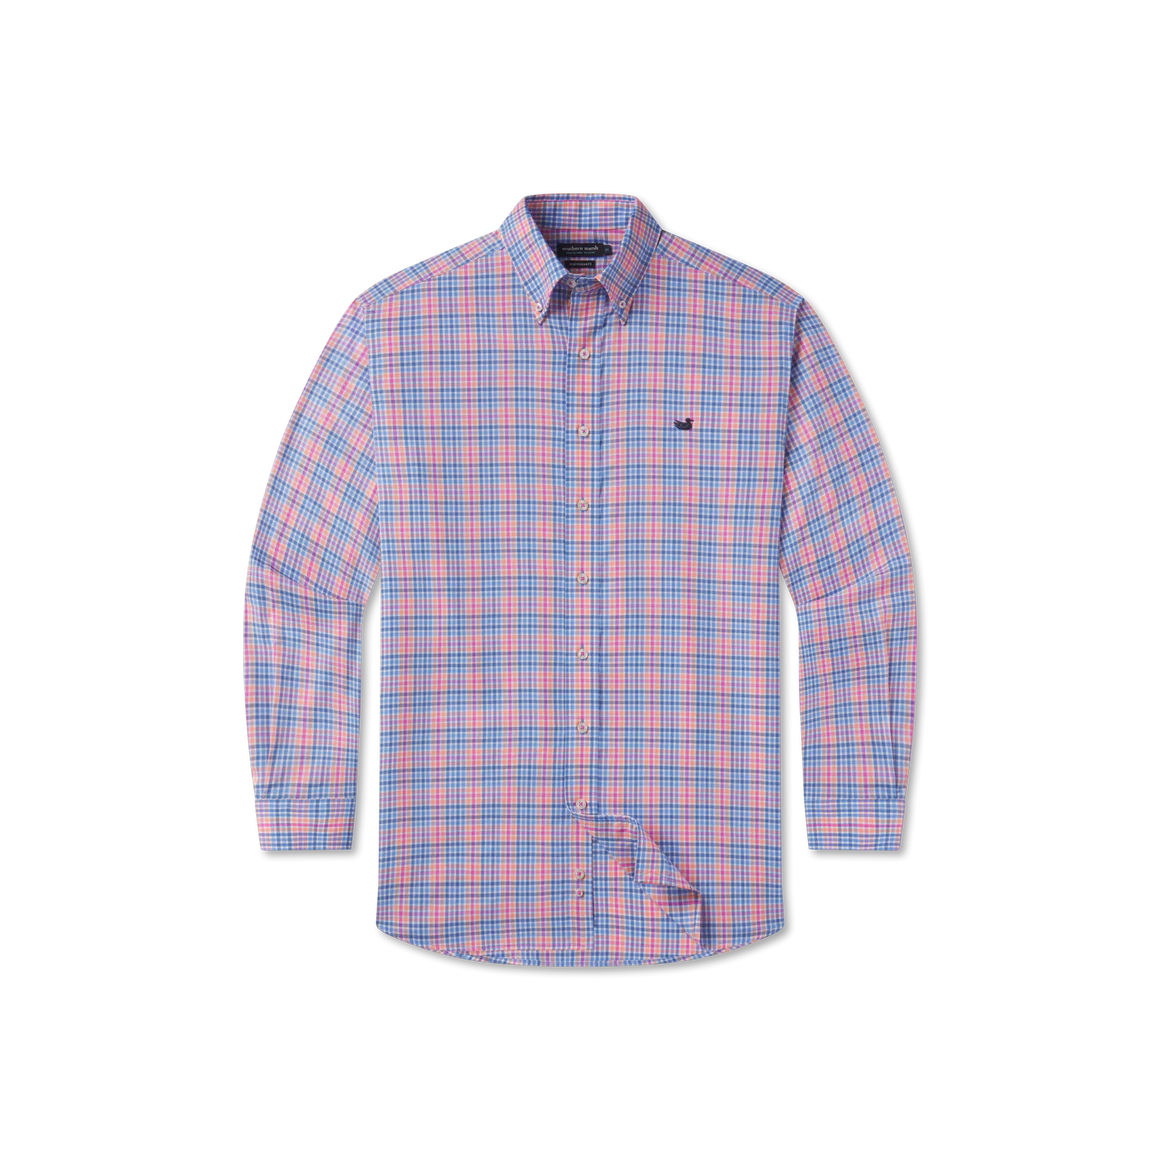 Blount Performance Dress Shirt in Blue & Navy by Southern Marsh